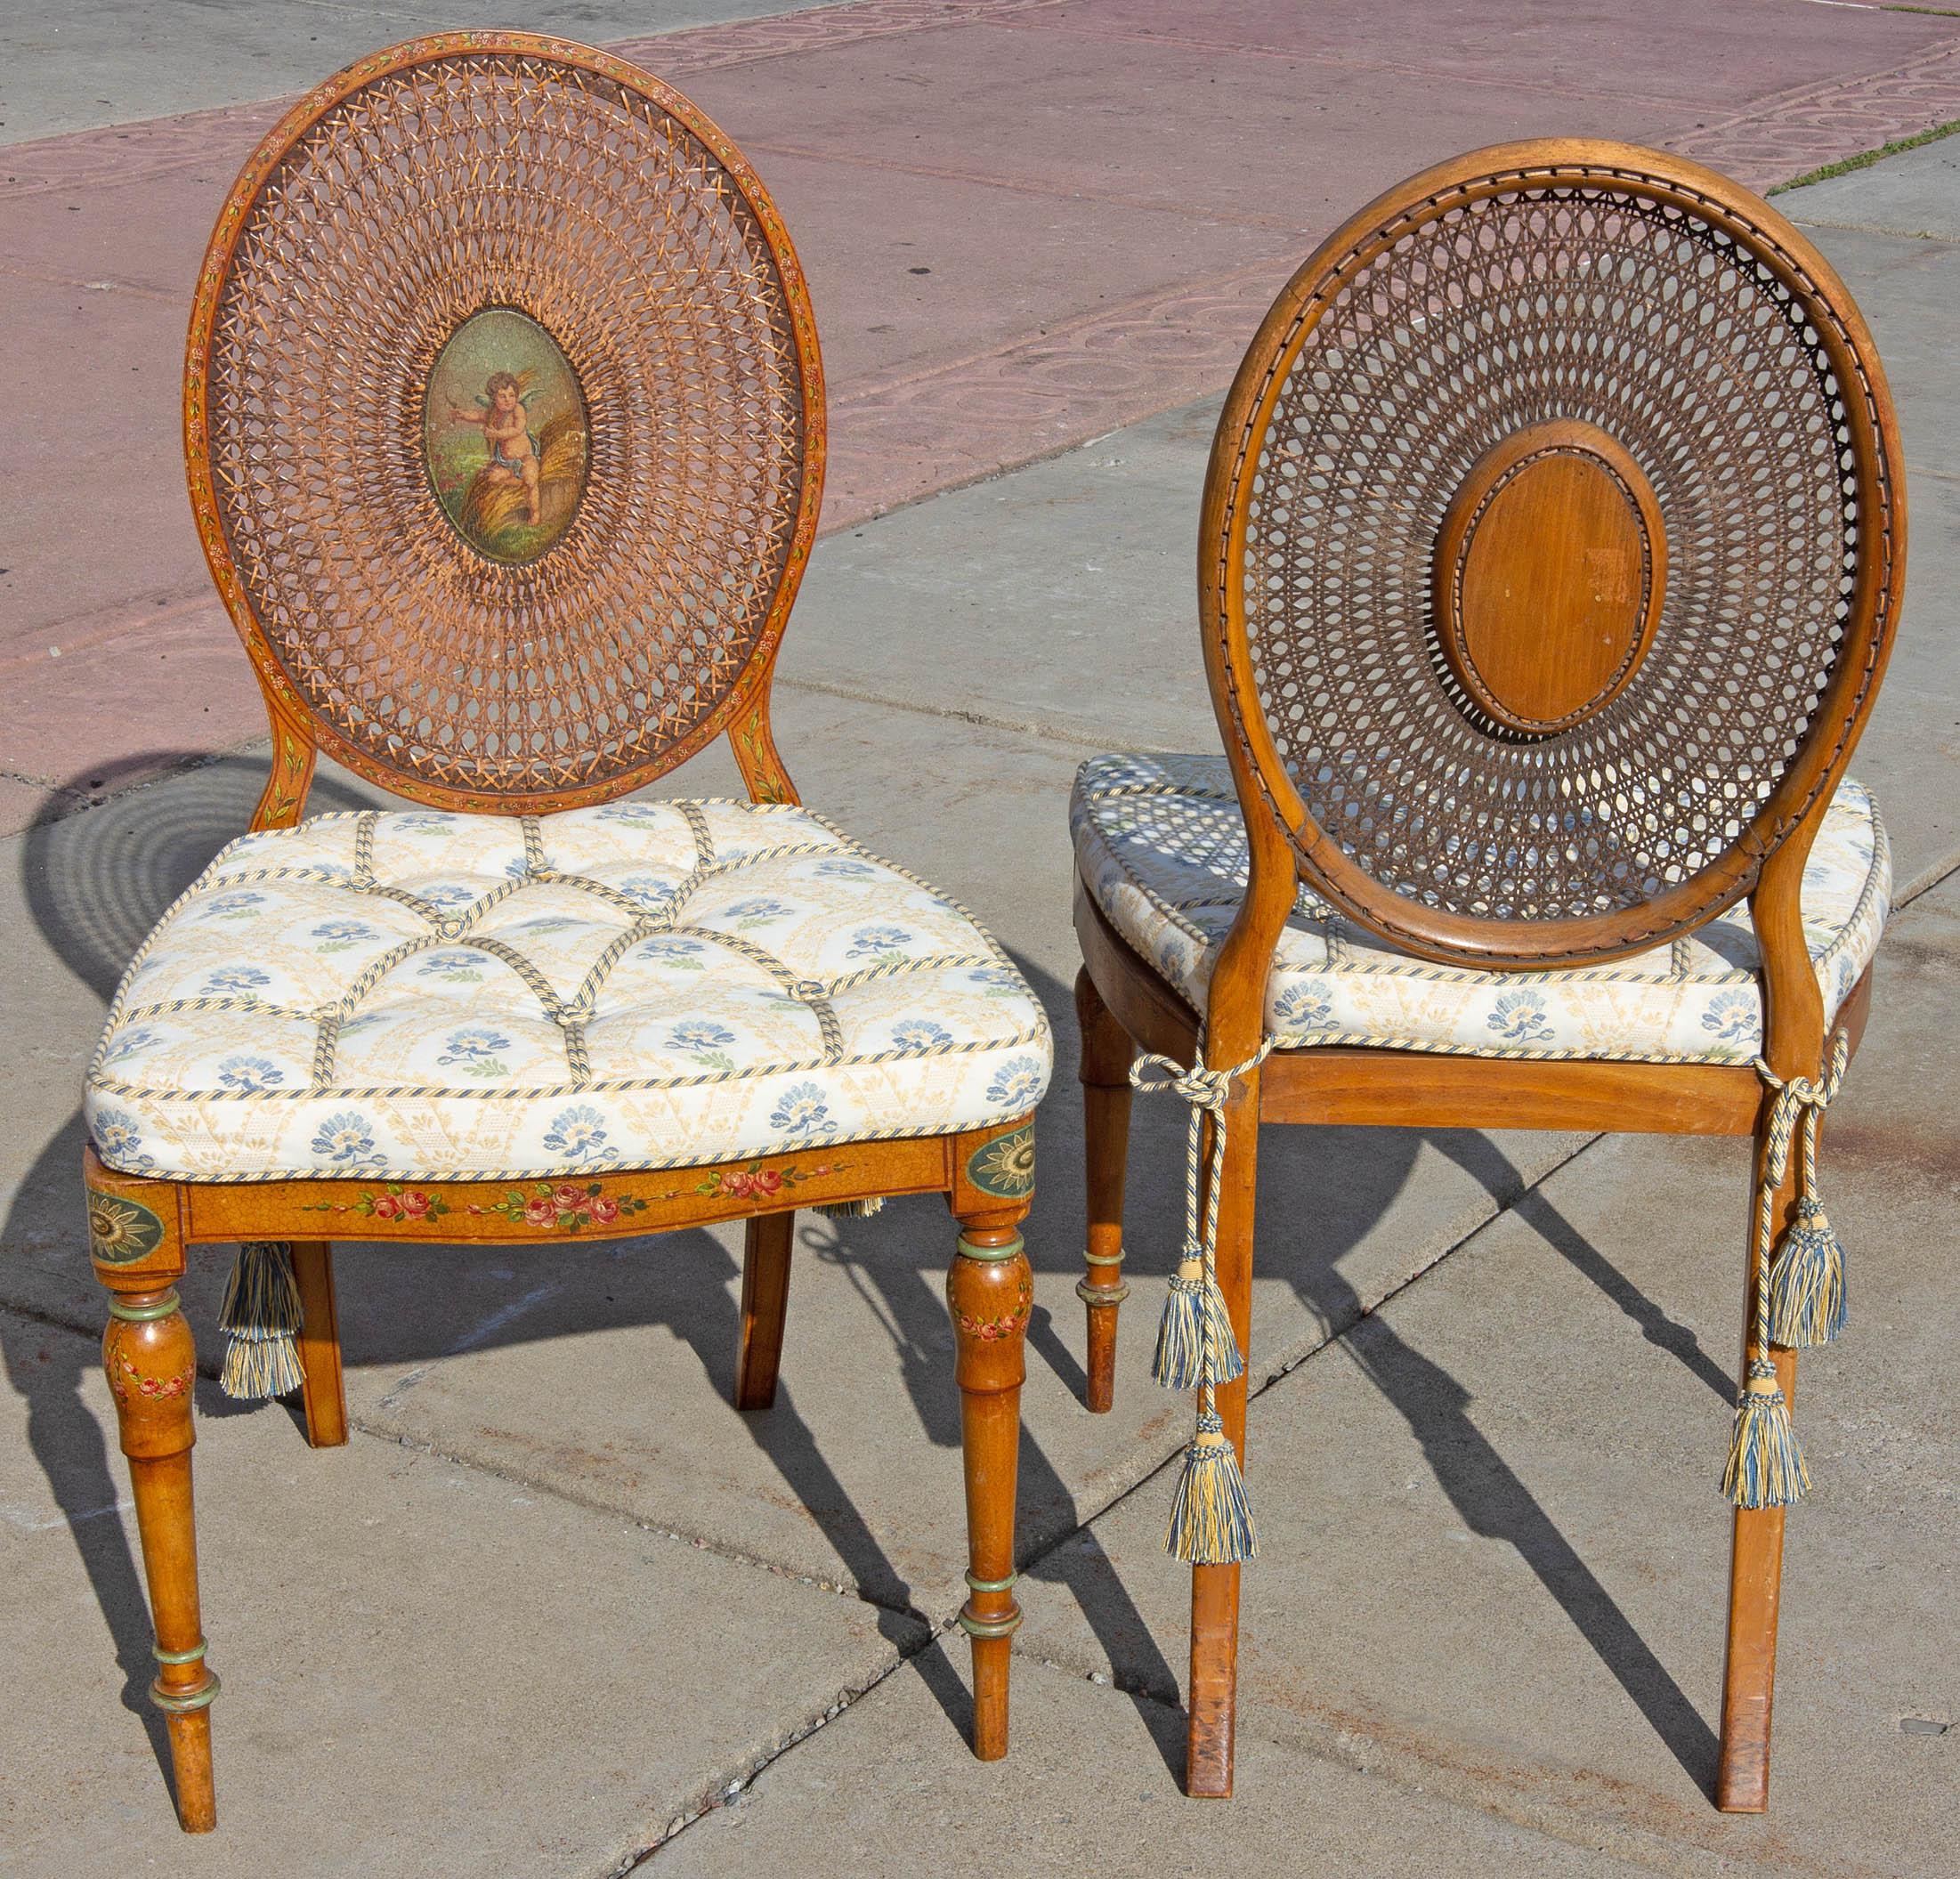 Antique Adams style side chairs. Finely hand painted. Caned backs and seats. Blue, cream, and gold brocade cushions. With silk cords and tassels, circa 1900. Upholstery in like new condition. Chairs are strong. Please, contact us for shipping